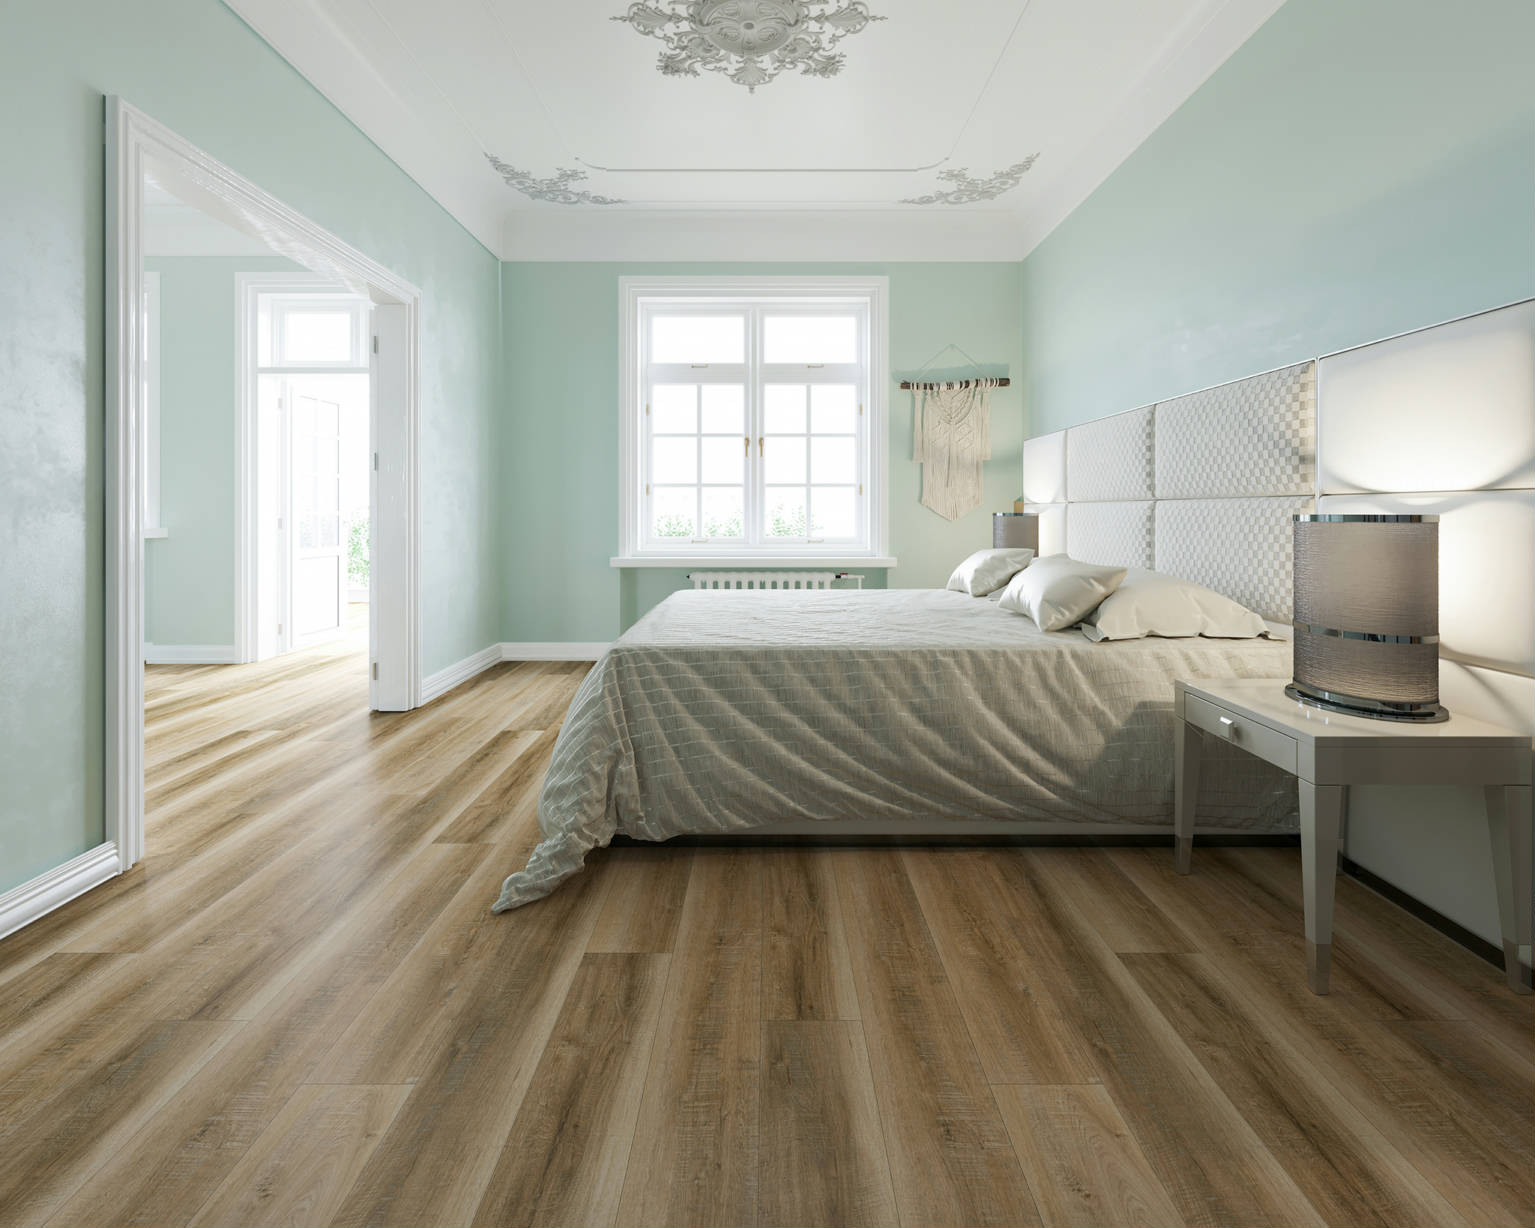 Timber Ridge Gold 12 2 | Qualis Ceramica | Luxury Tile and Vinyl at affordable prices